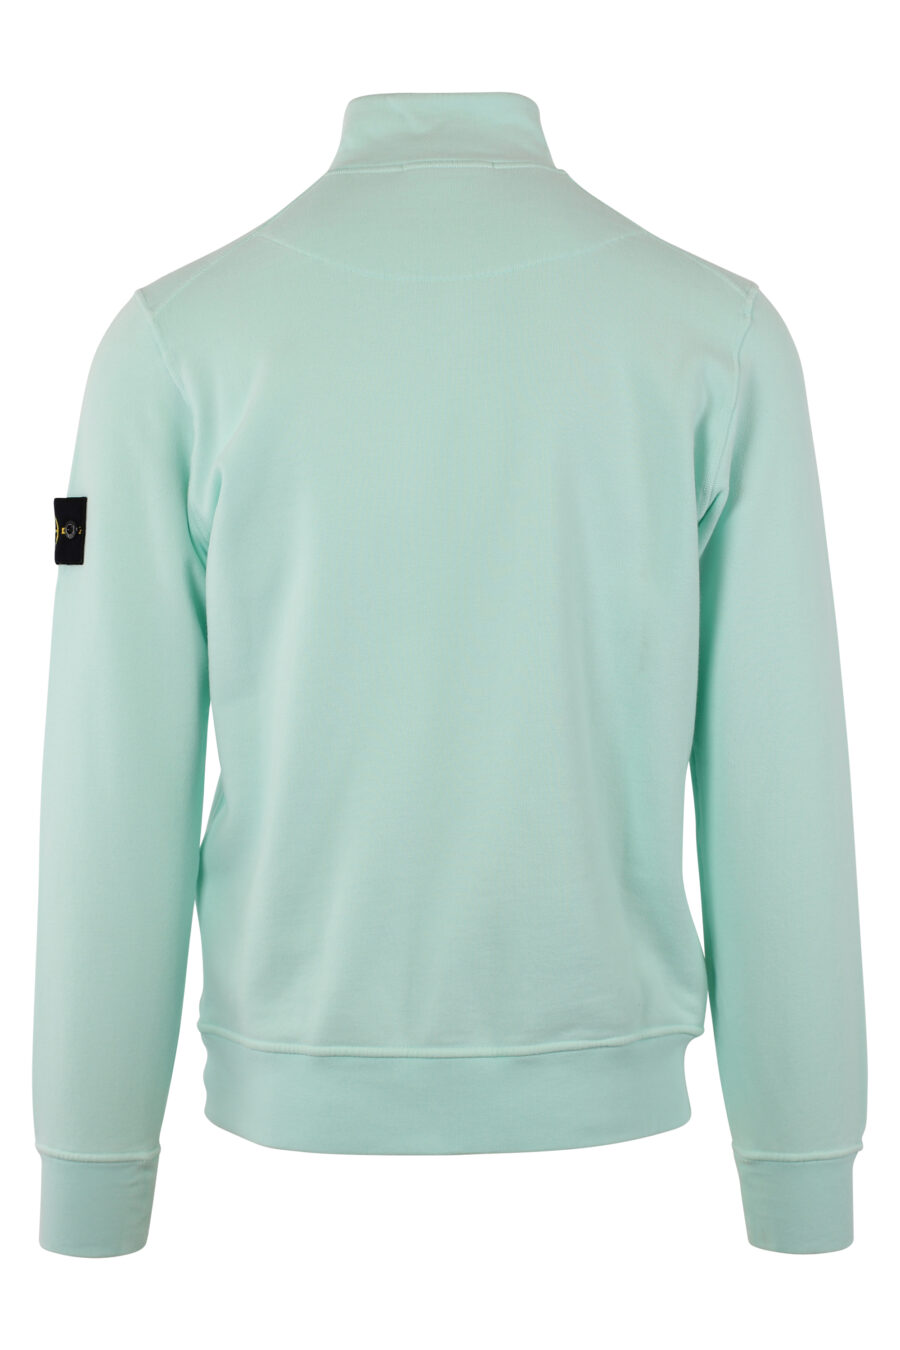 Light blue sweatshirt with short zip and patch - IMG 1477